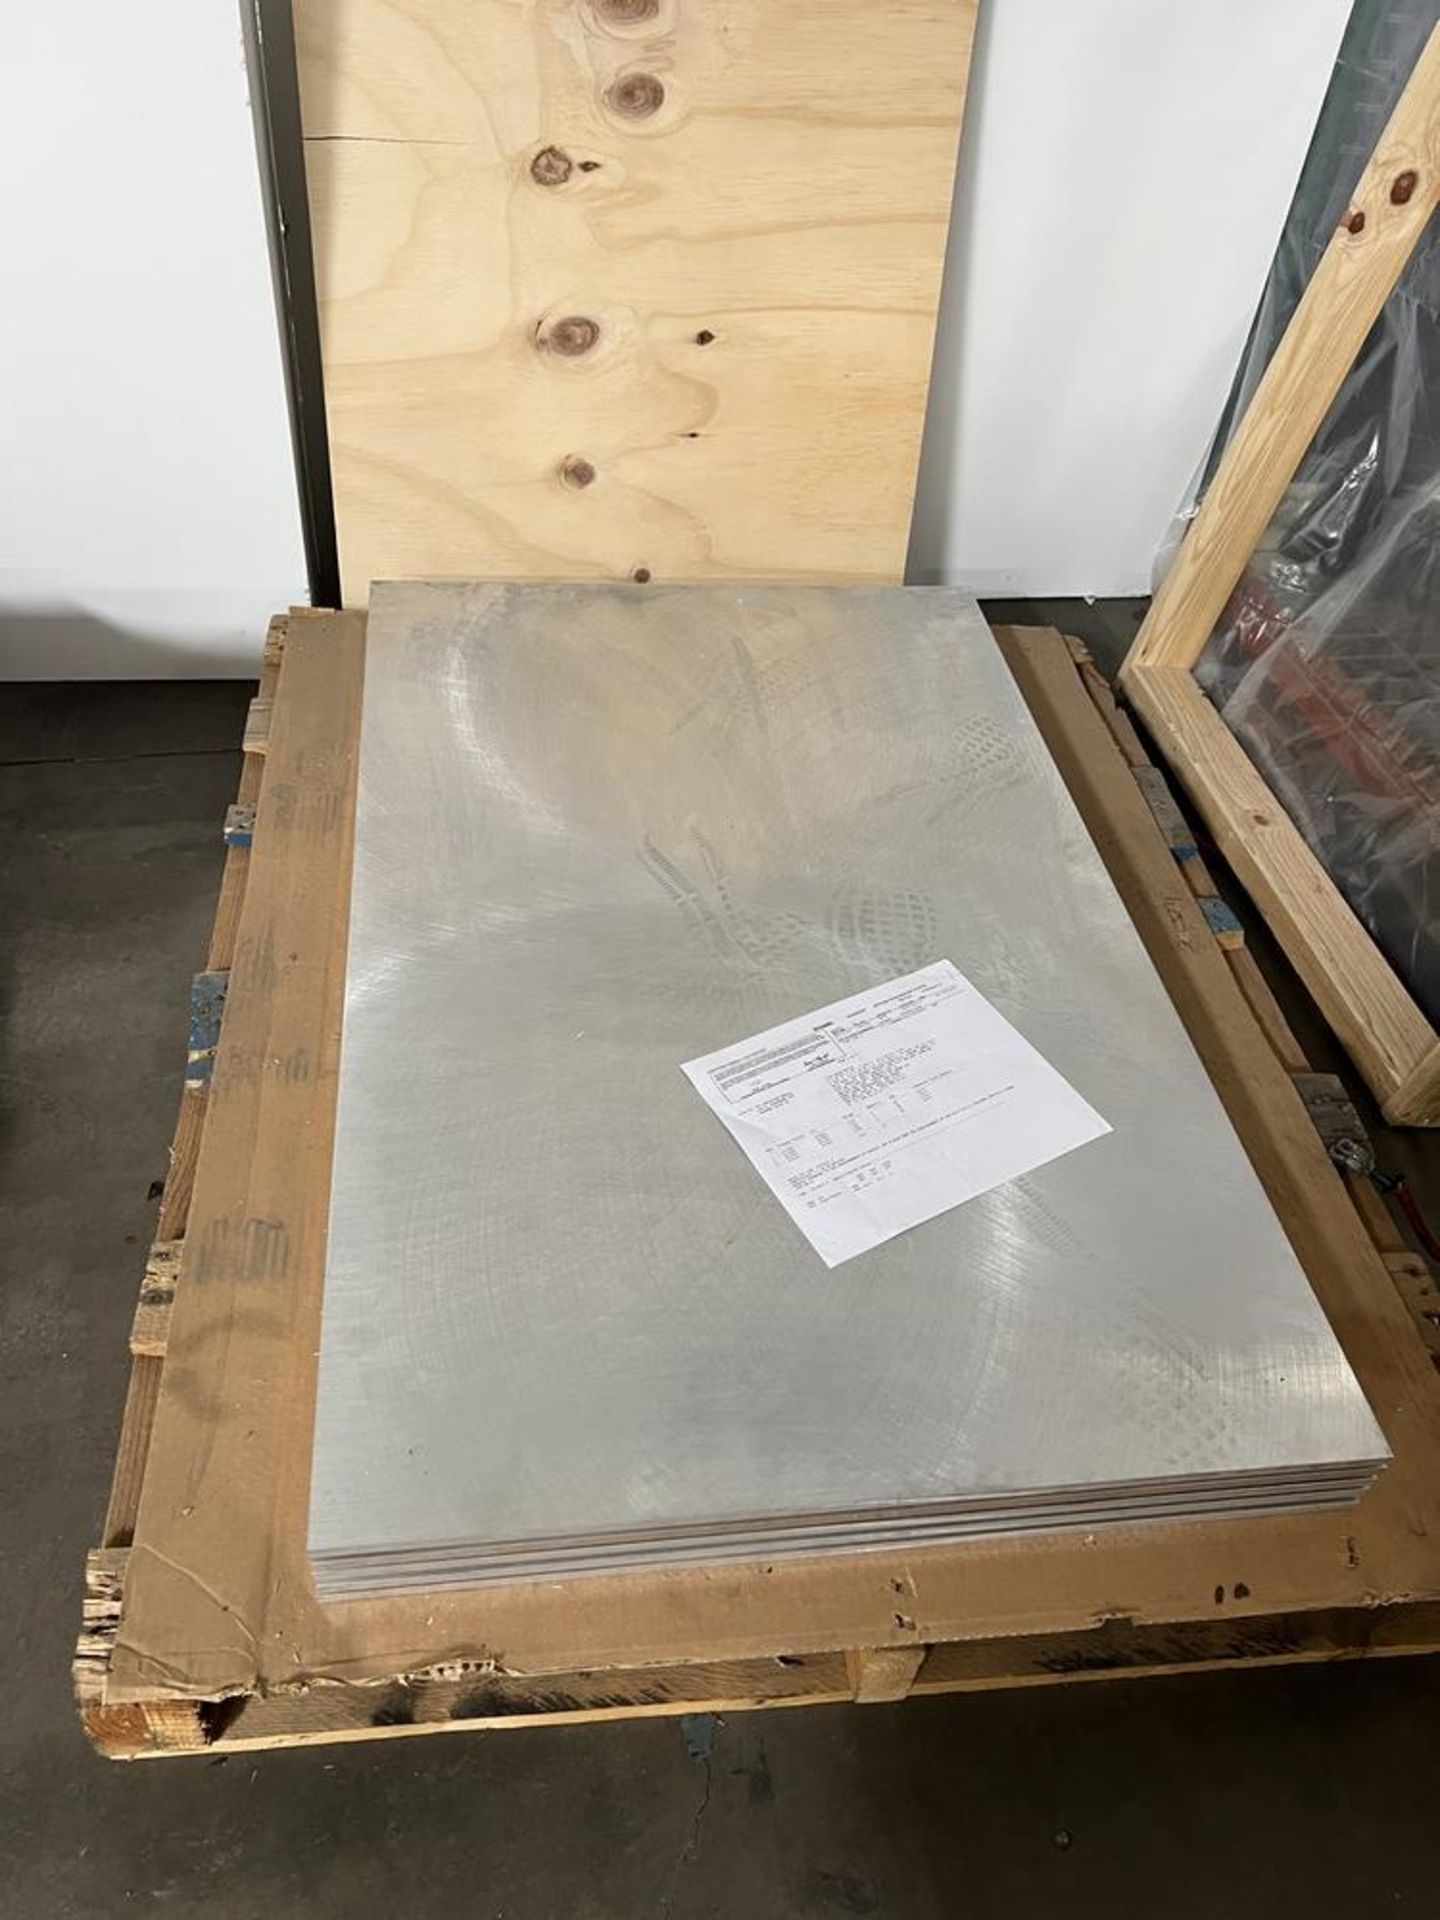 (5) Precision Ground Aluminum Plate 44" x 28" x 1/2" With Certified Inspection Report - Image 4 of 4